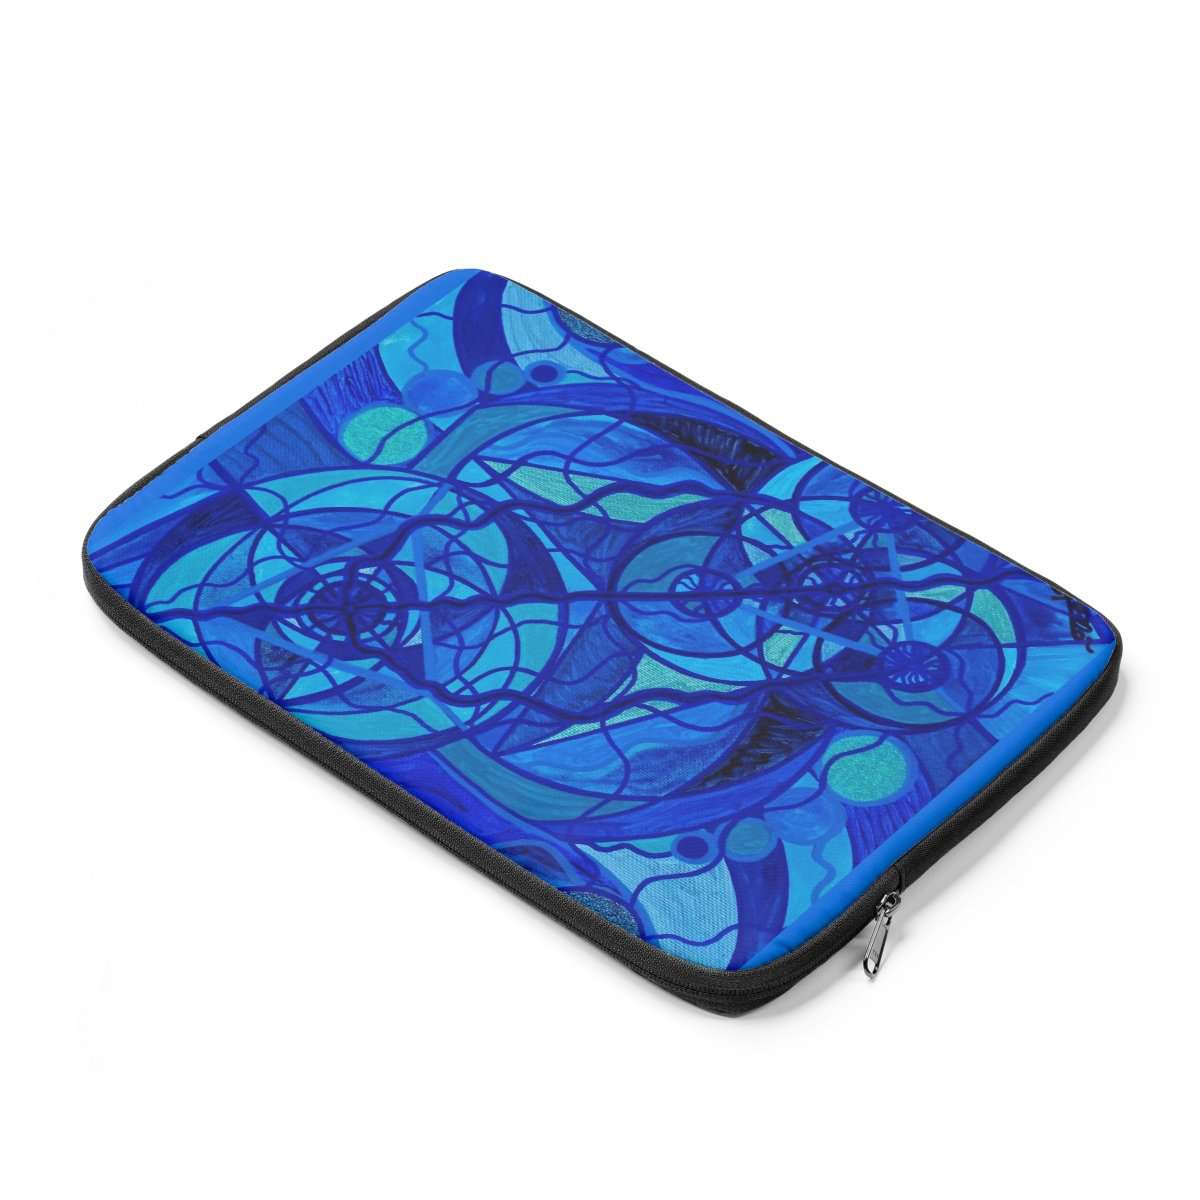 the-place-to-buy-arcturian-calming-grid-laptop-sleeve-online-sale_1.jpg